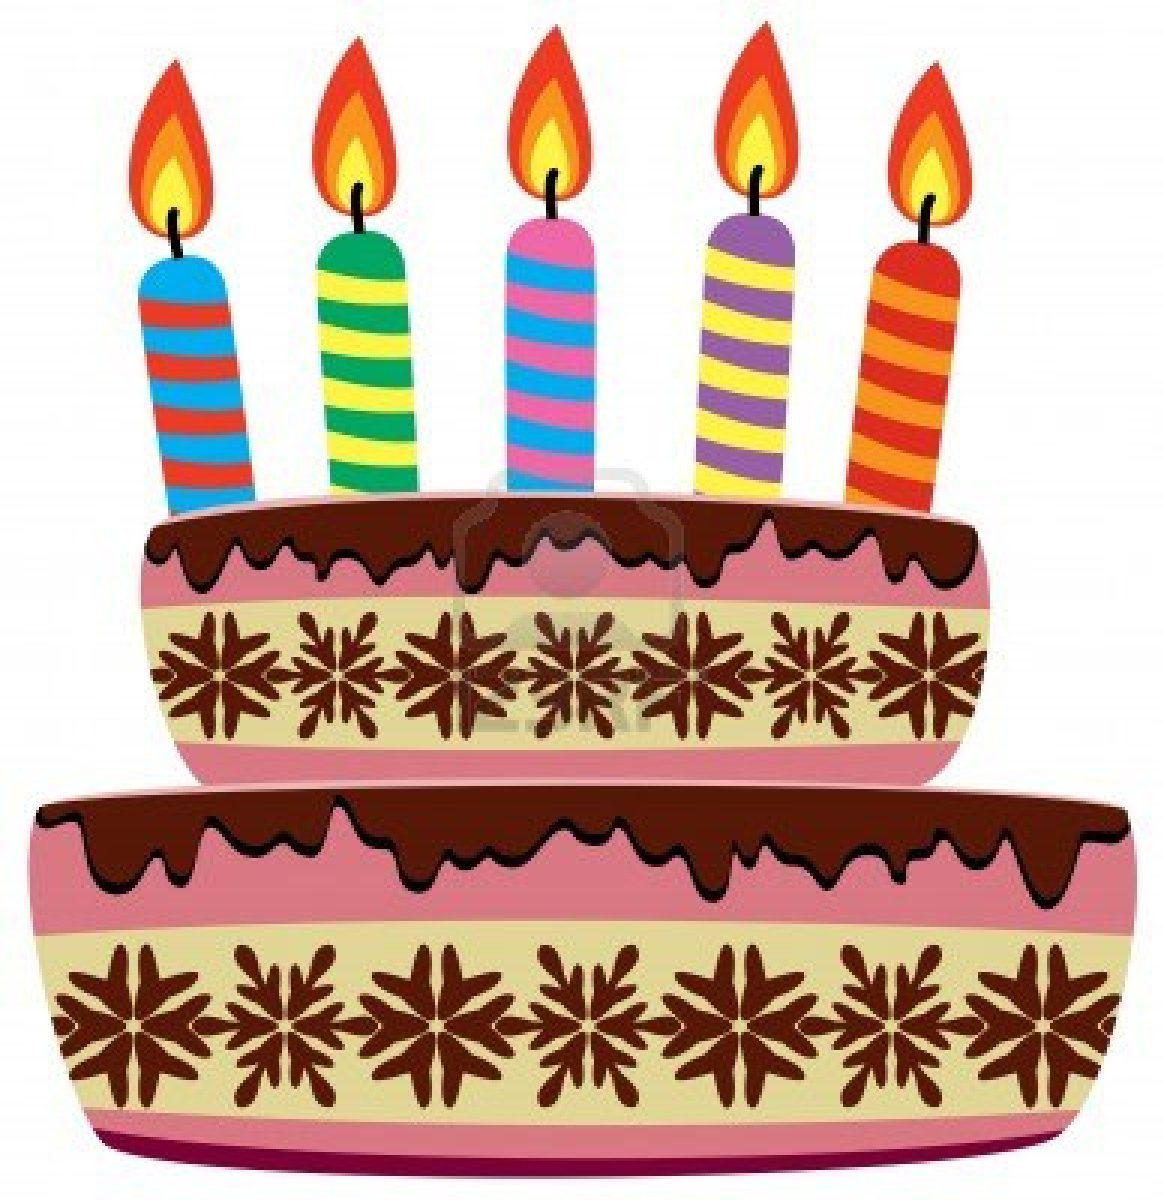 9206919-vector-birthday-cake-with-burning-candles | Dublin ...